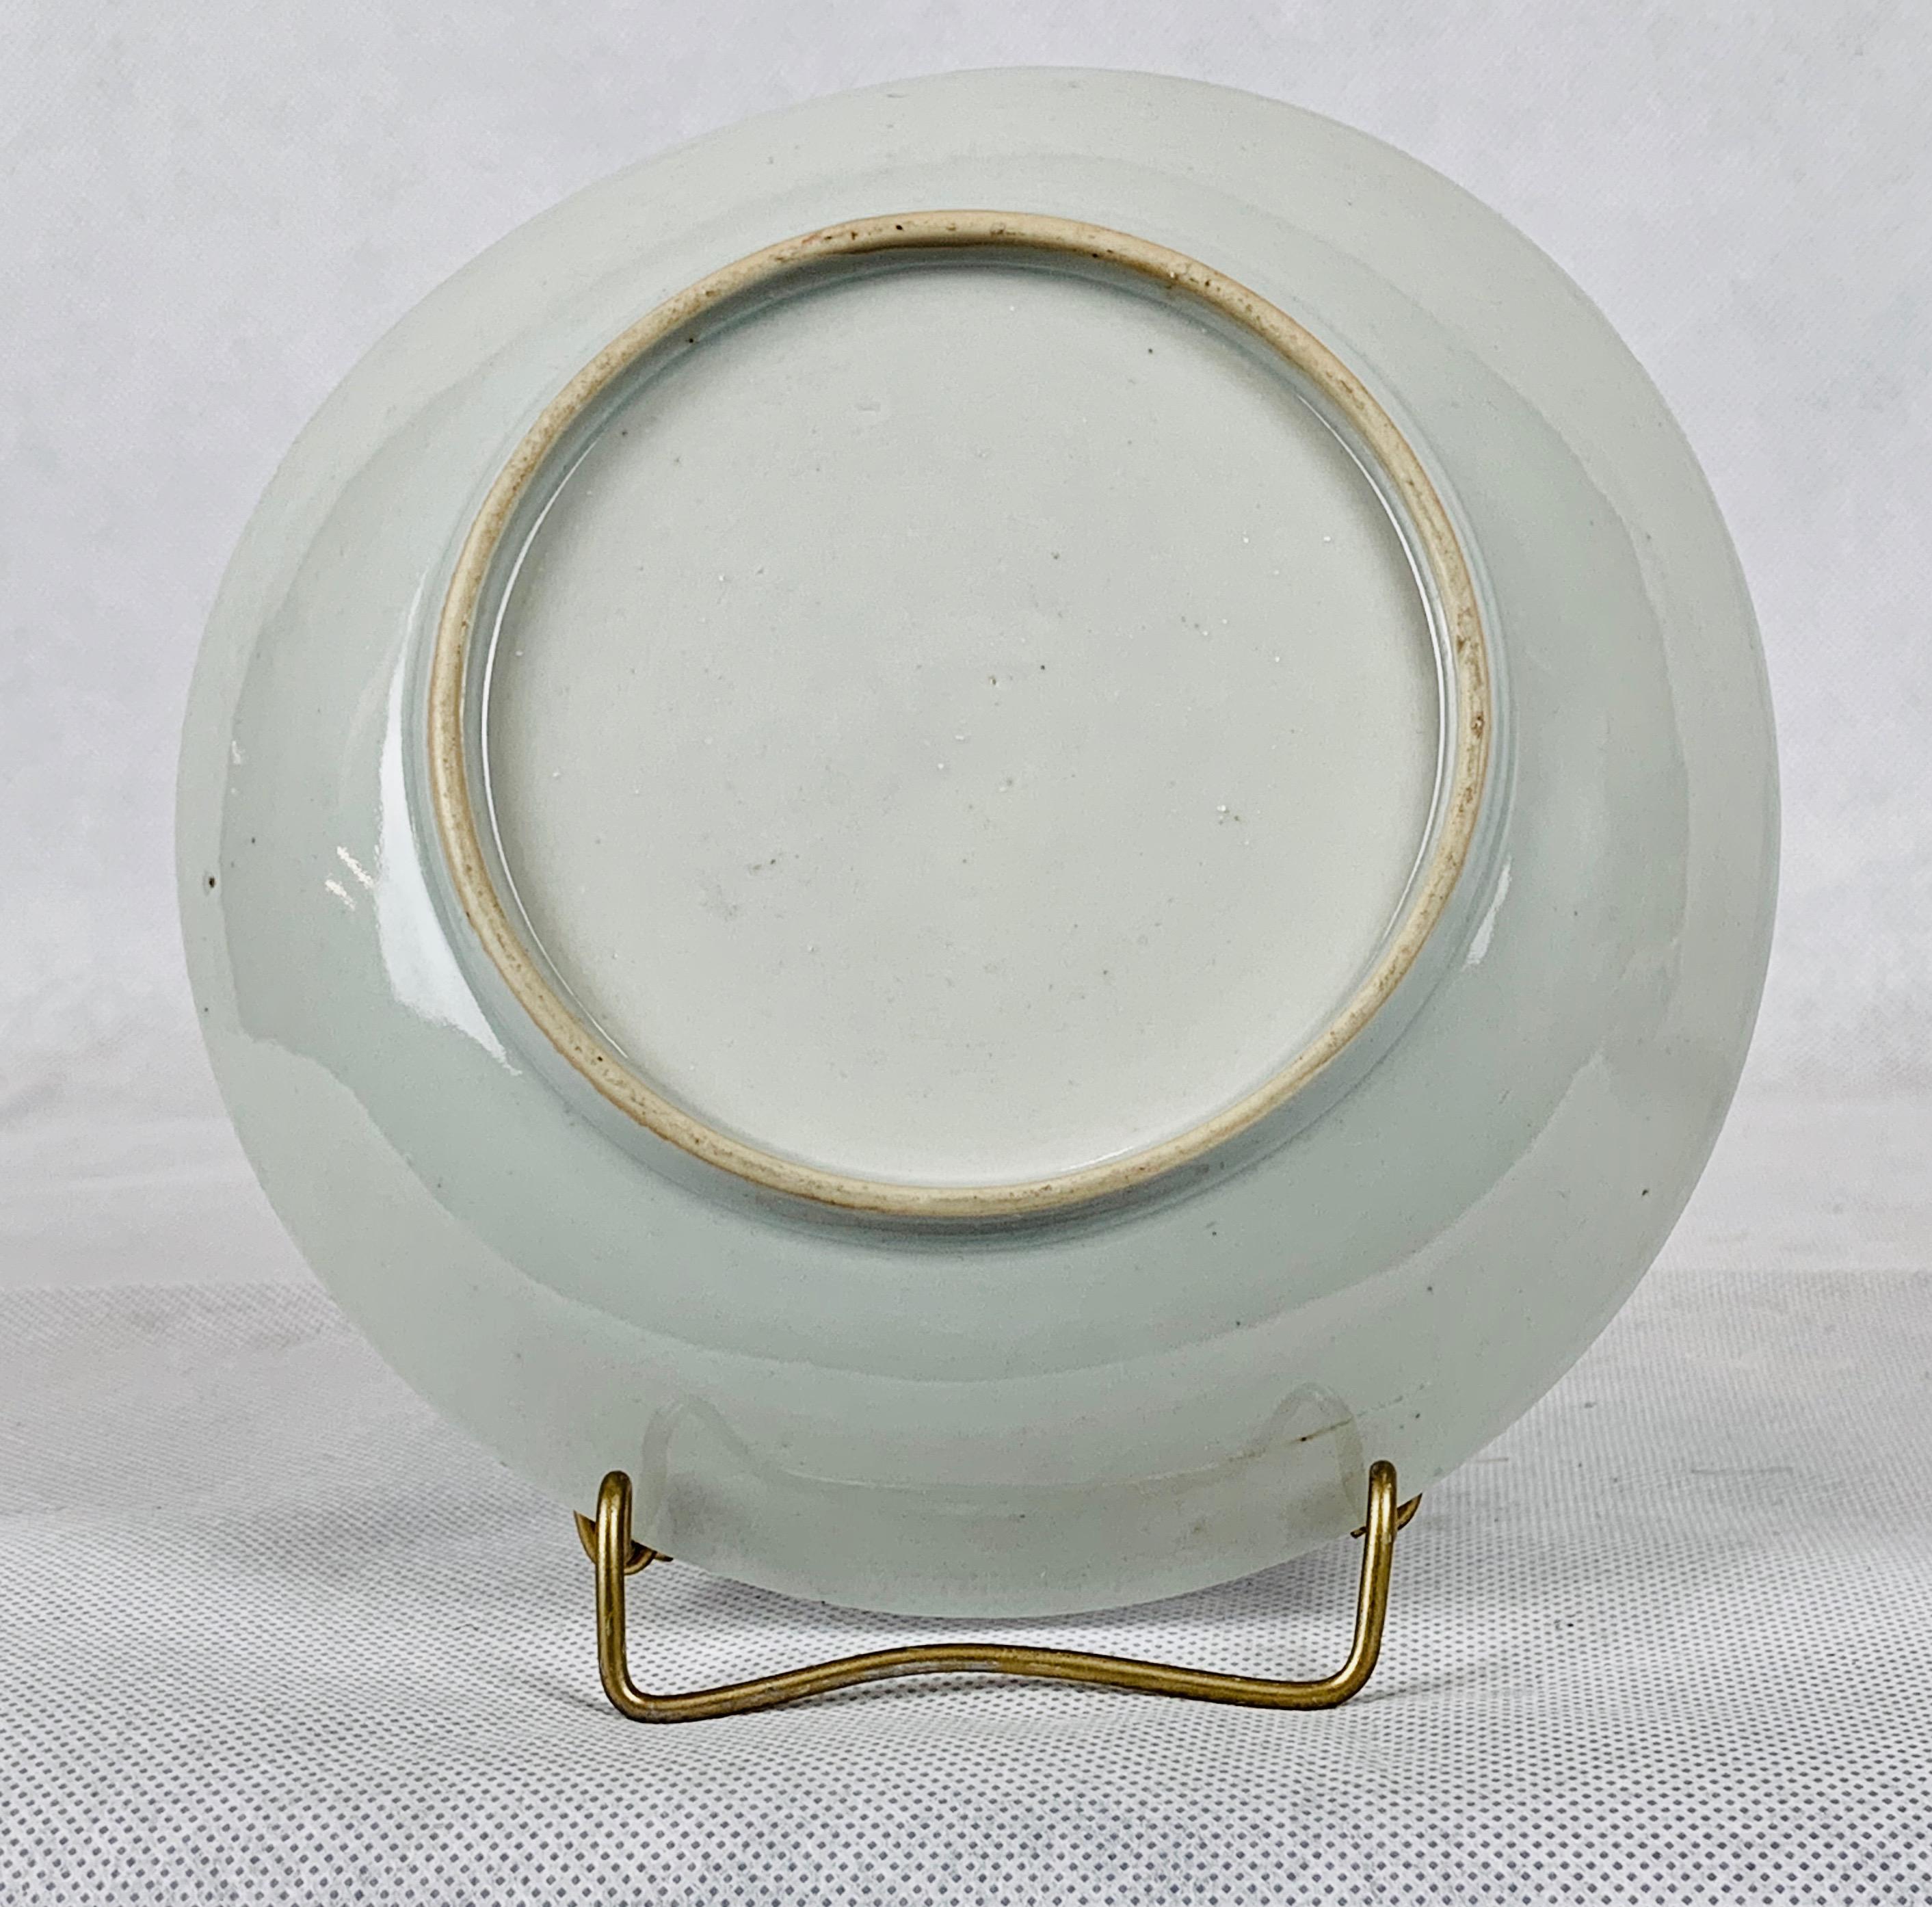 Late 18th Century Export Porcelain Handless Tea Bowl and Saucer in the Chinese Imari Pattern